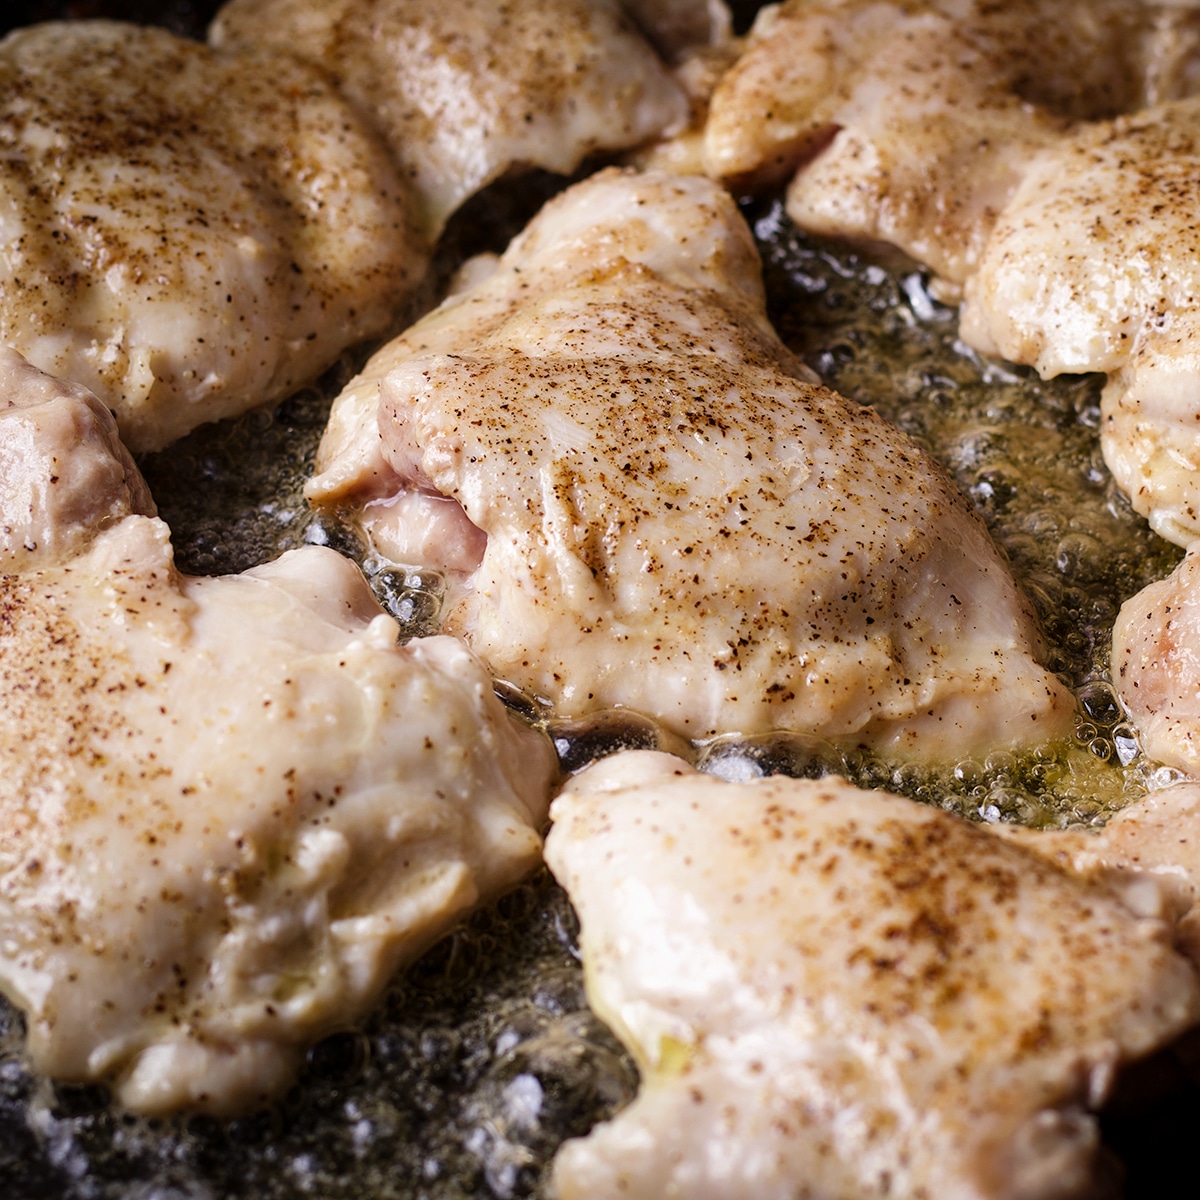 Boneless, skinless chicken thighs cooking in hot butter and oil until they are browned on the outside.